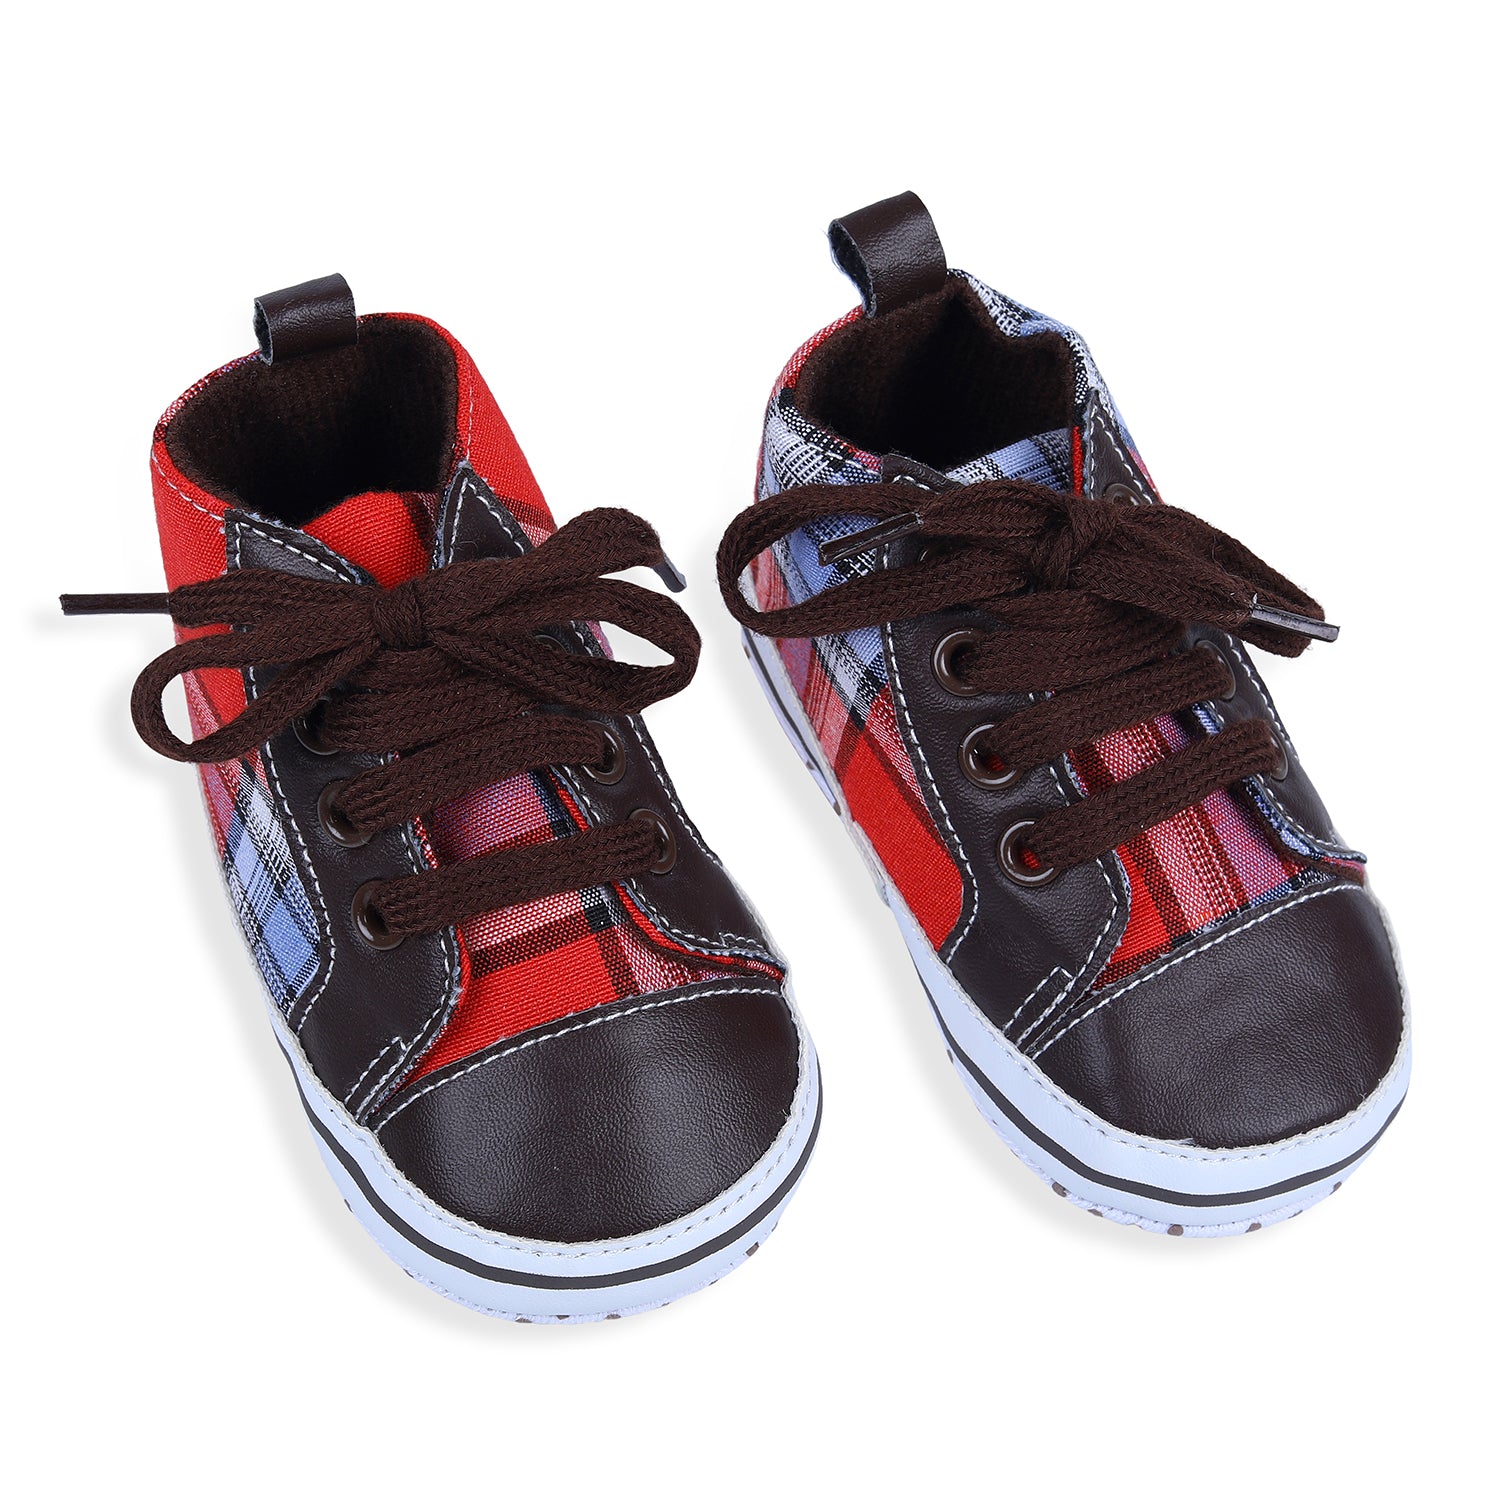 Baby Moo High Top Lace-Up Checked Stylish Sneaker Booties - Red